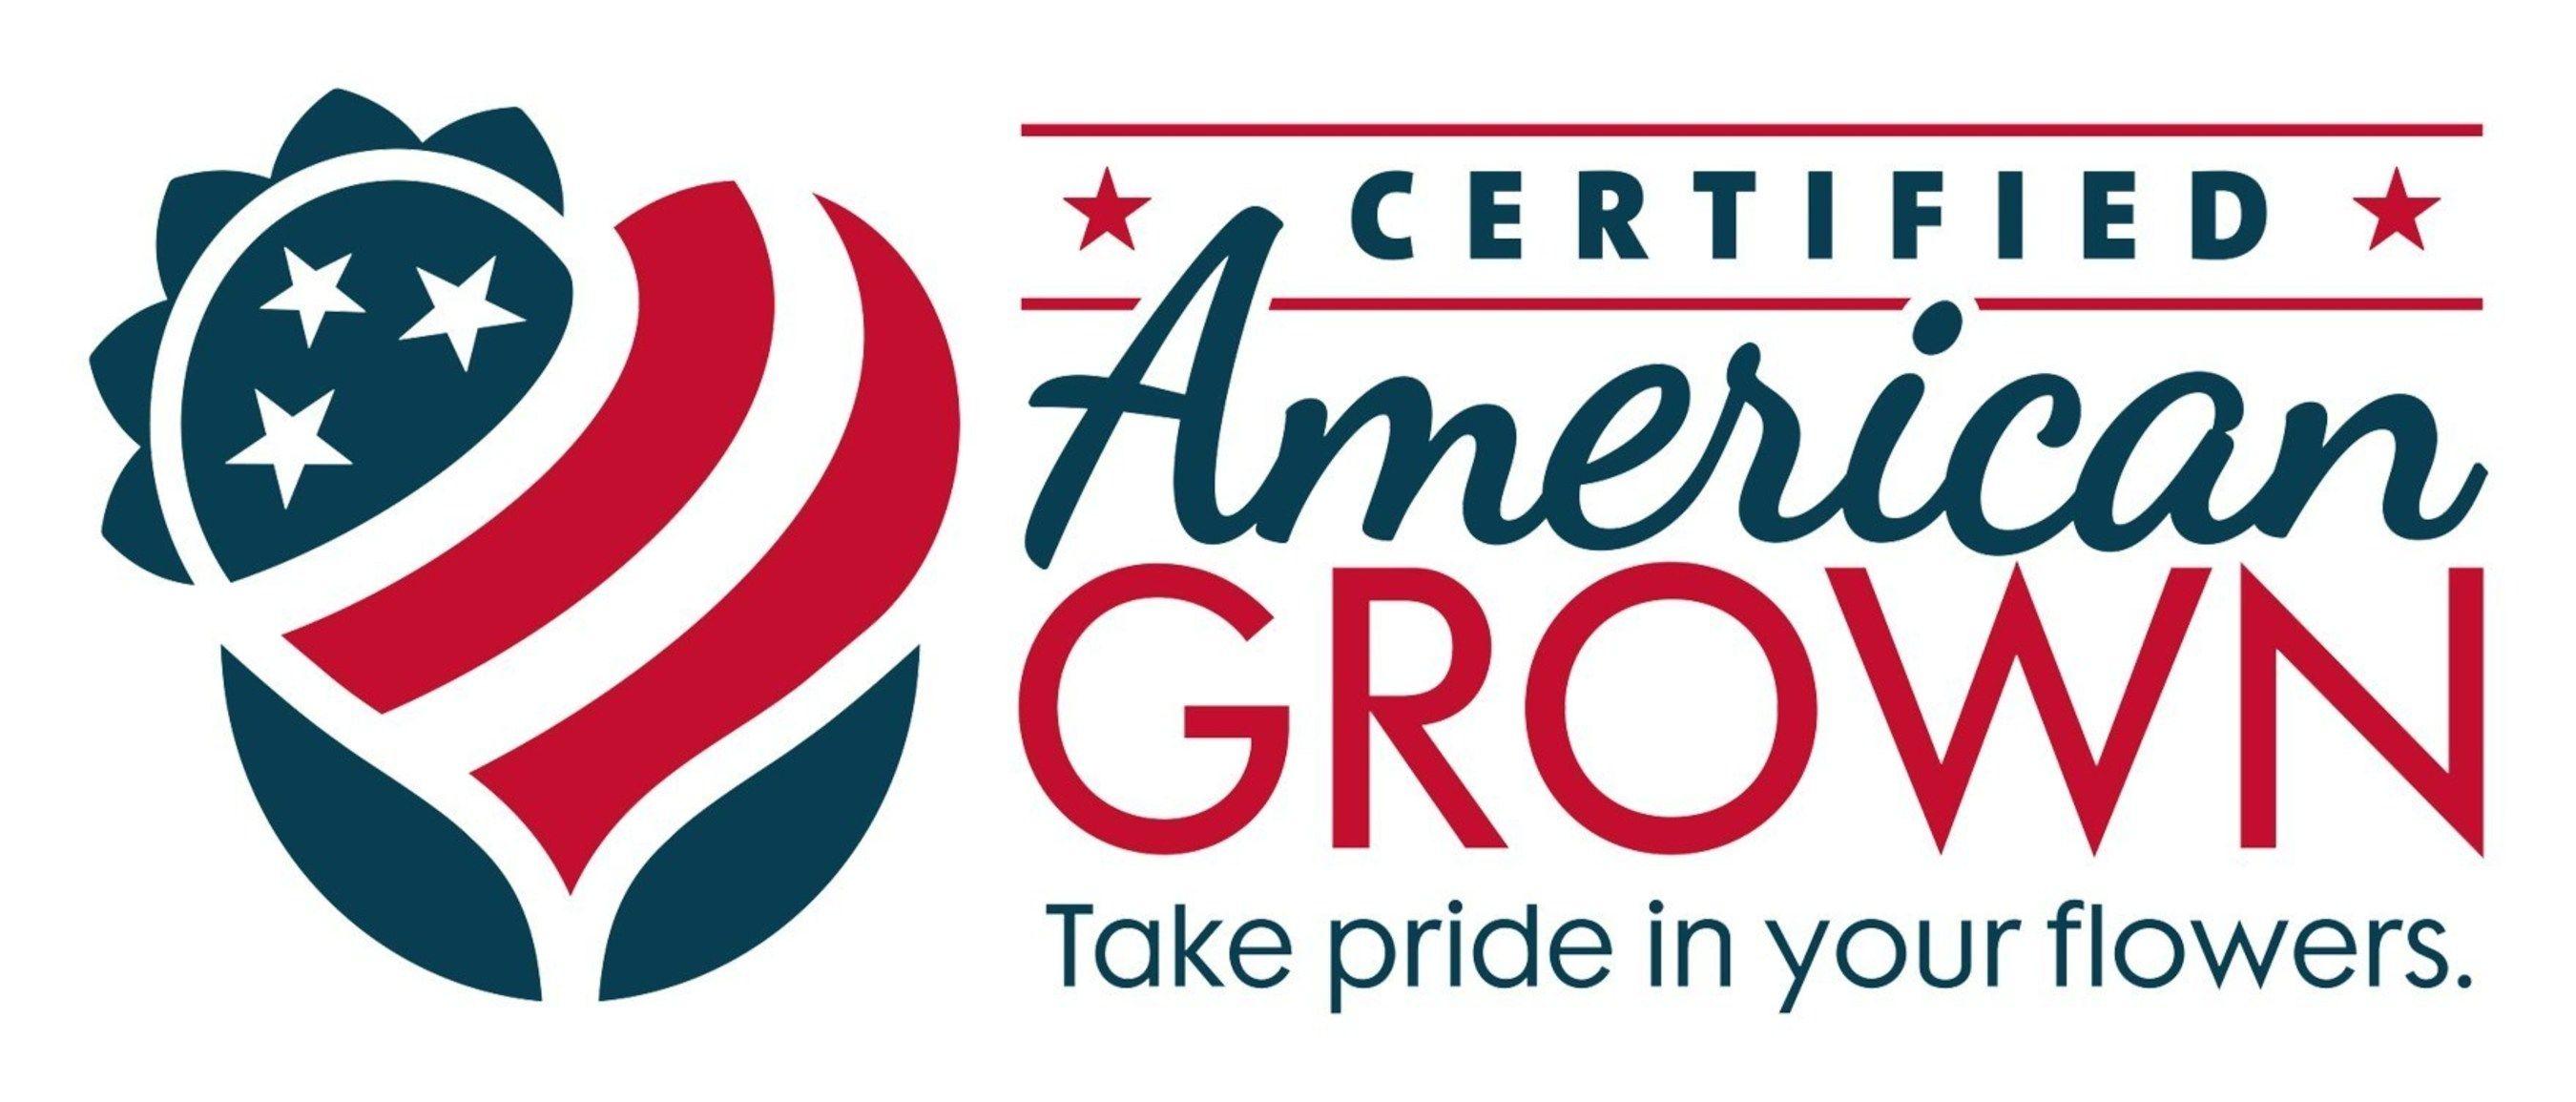 Flower with Red Oval Logo - Certified American Grown Flowers Announces The 2015 Field To Vase